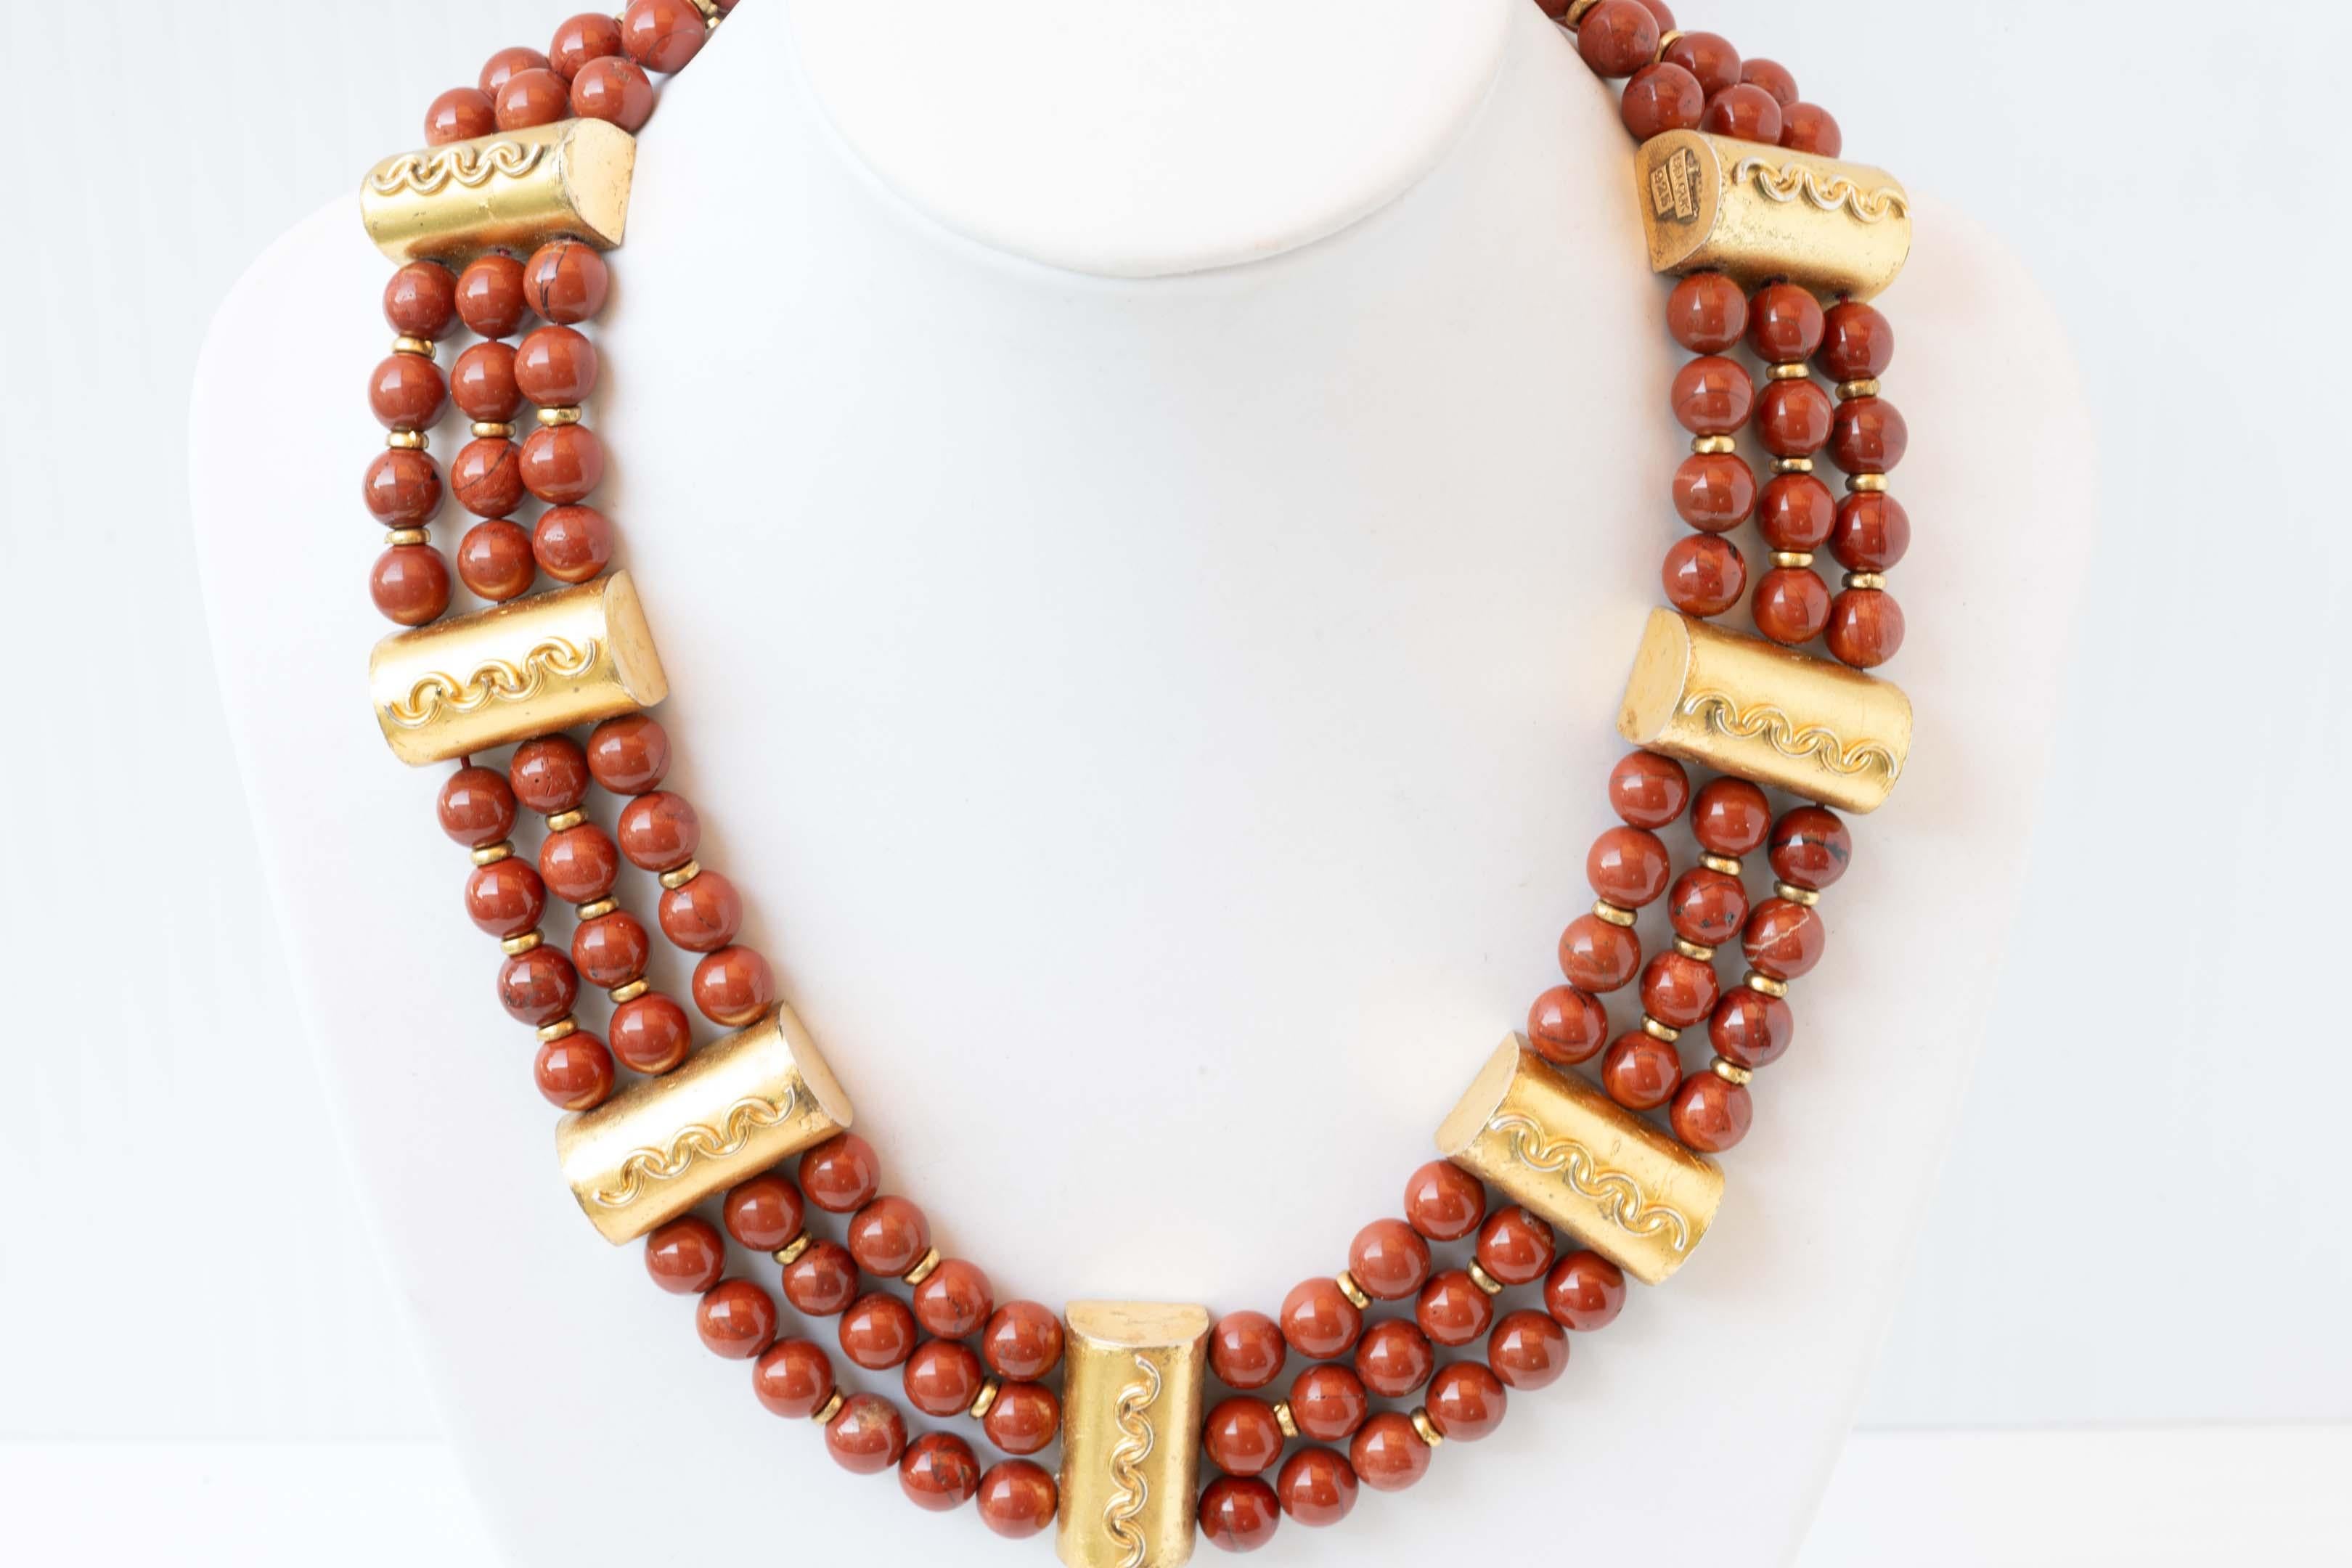 Gold plated sterling silver & triple strand carnelian bead necklace. Signed and marked Selcuk 925, made in late 1990. Measures 16 inches long, preowned and in good condition. 